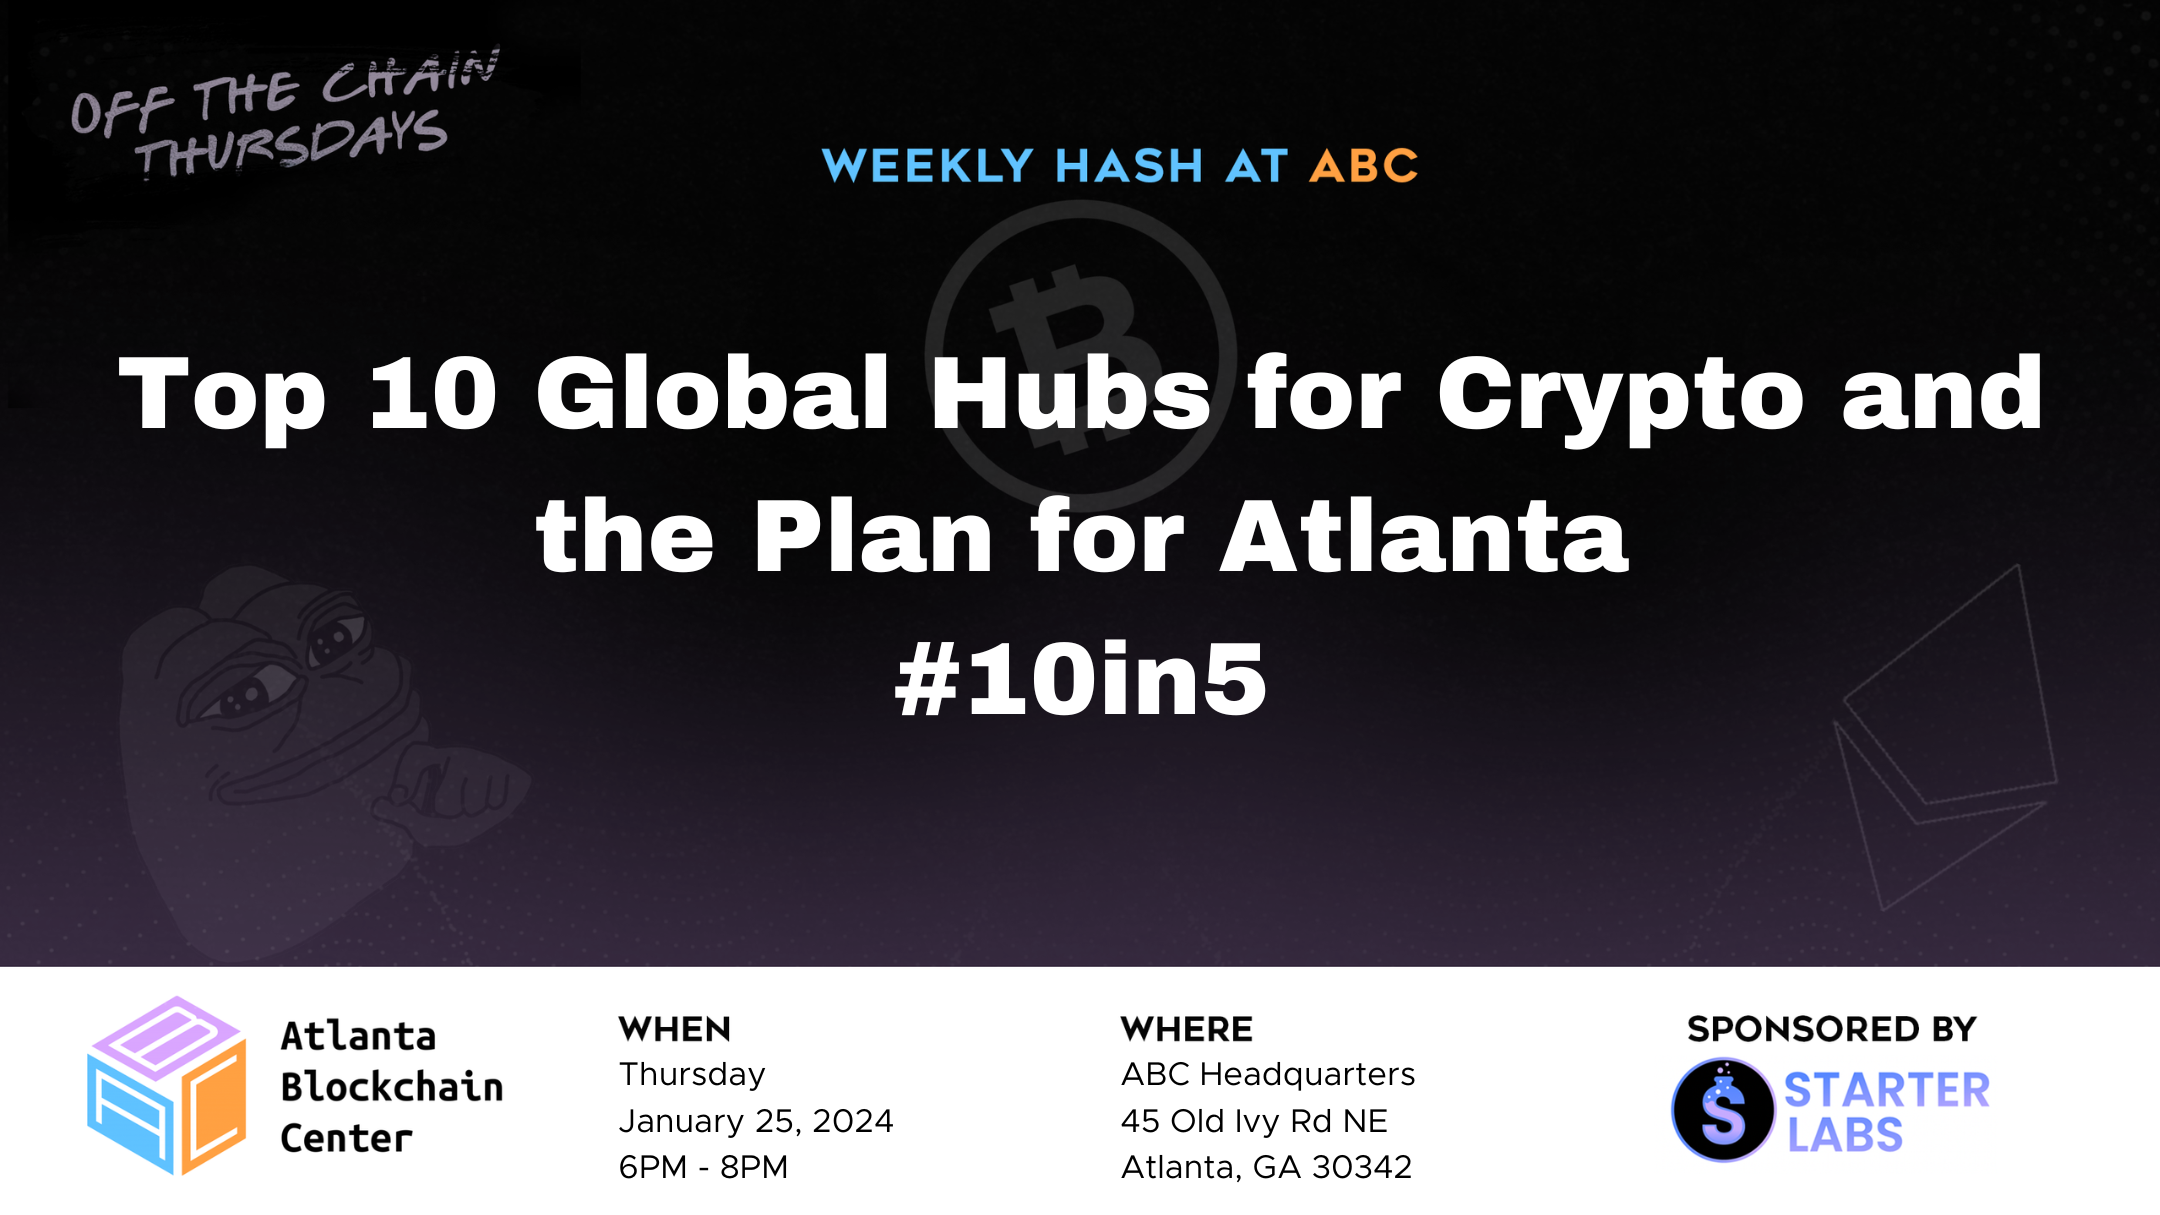 Top 10 Global Hubs for Crypto and the Plan for Atlanta #10in5